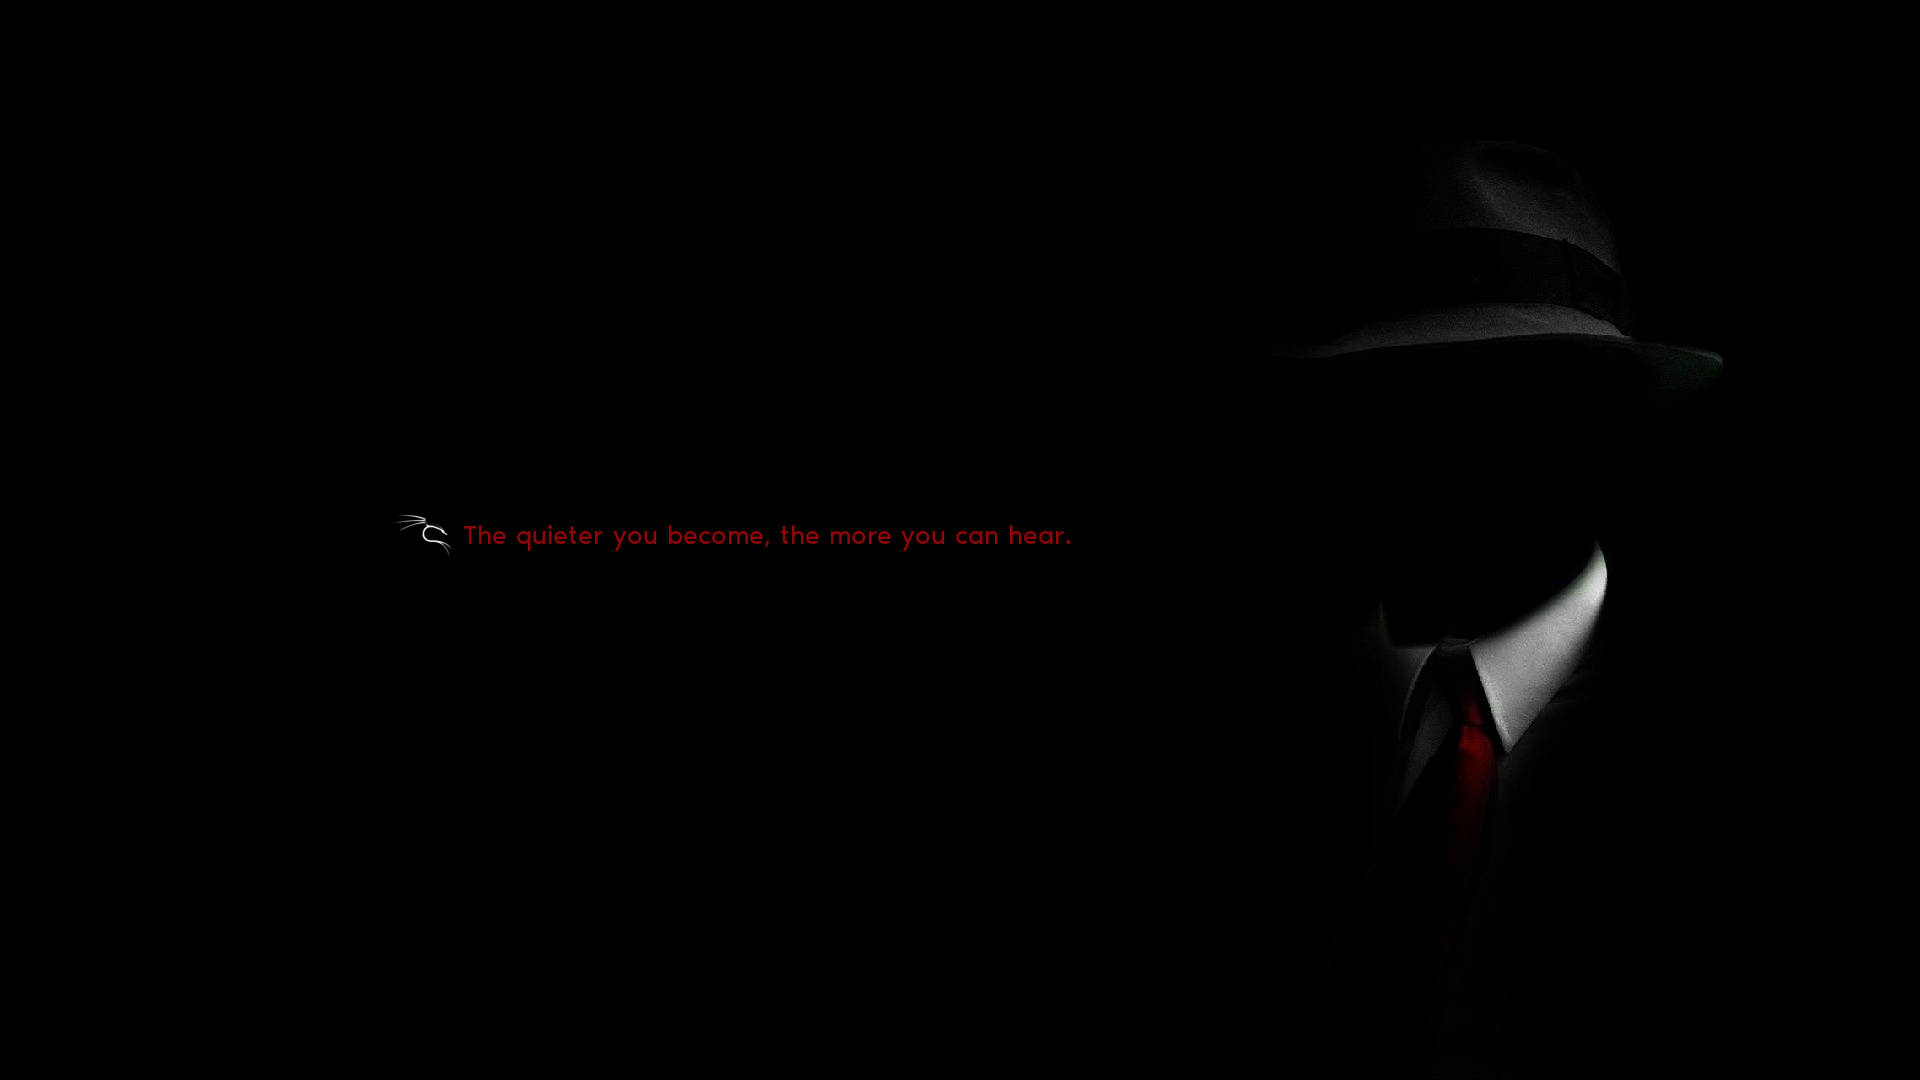 Stay Quiet With Kali Linux Wallpaper